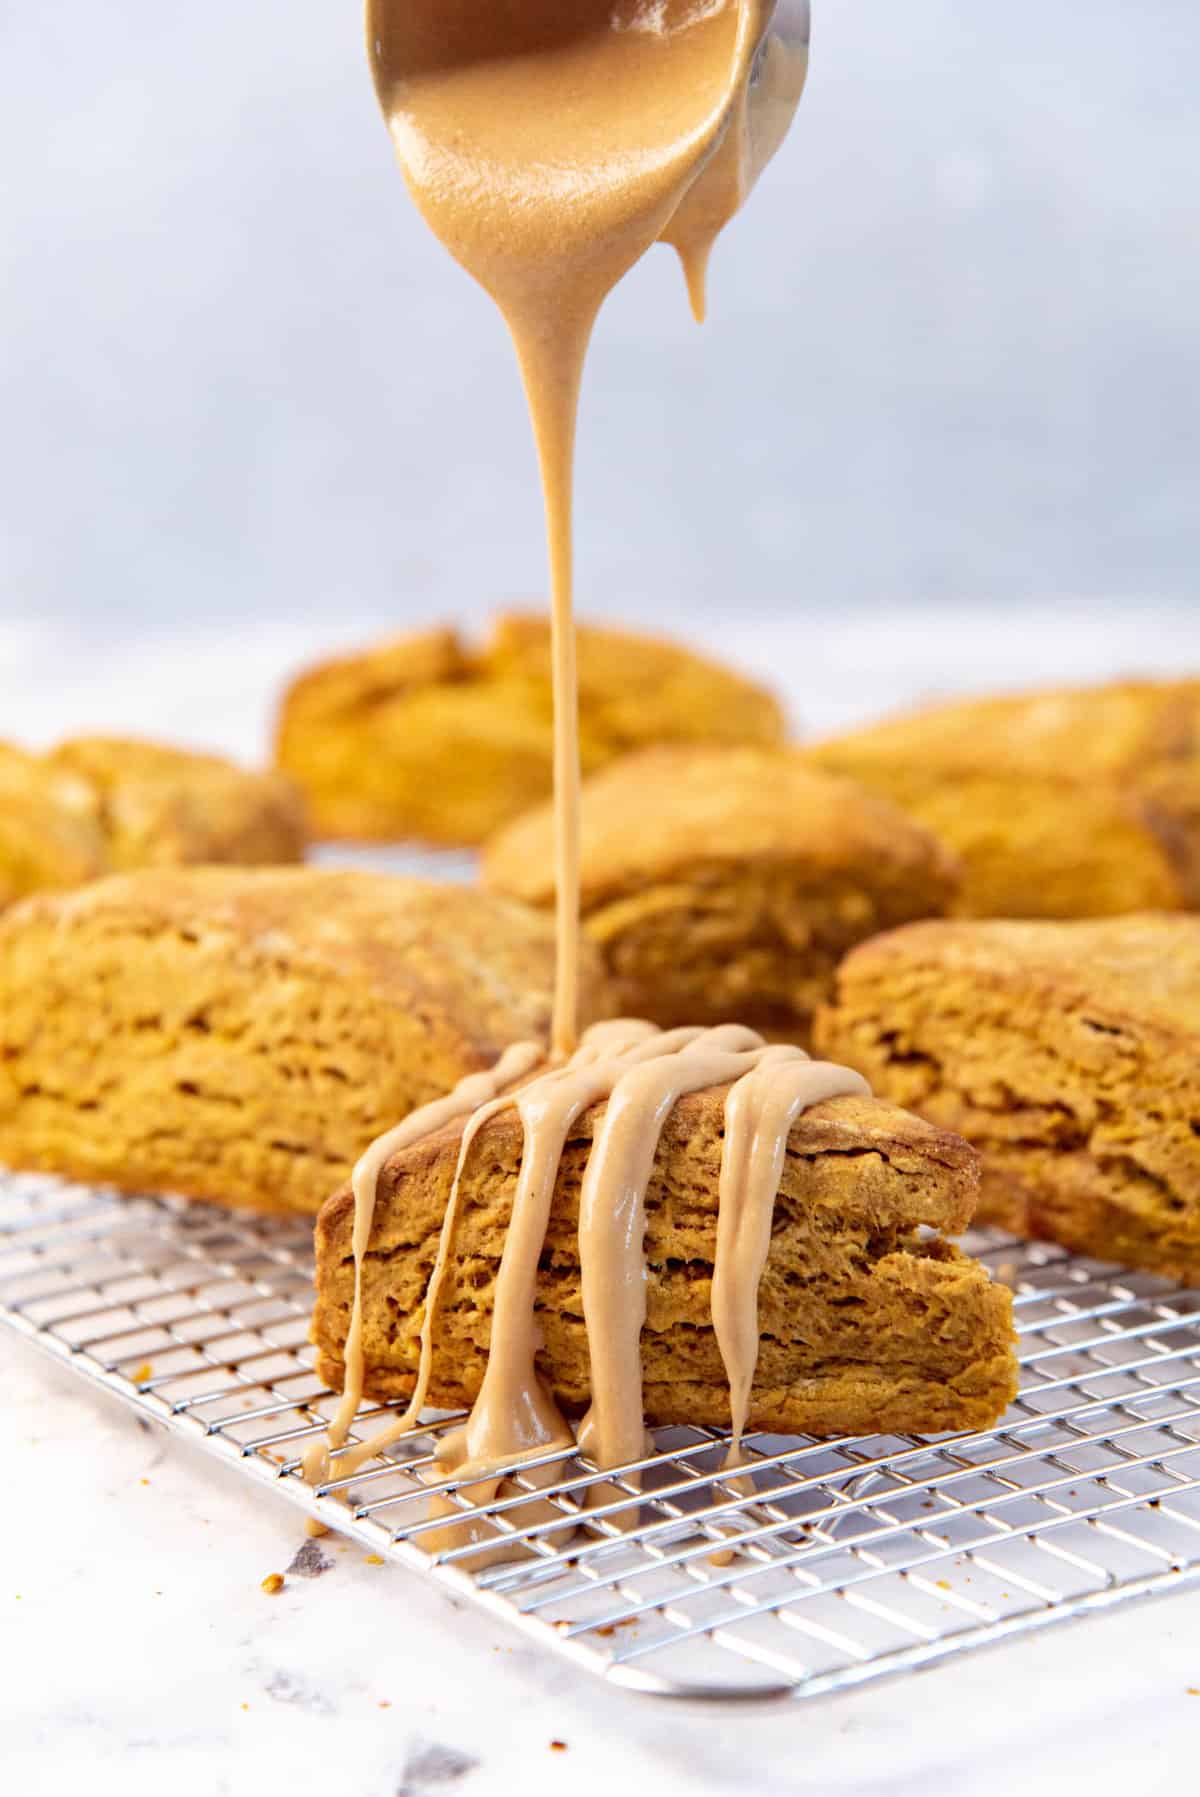 A coffee glaze being drizzled over a pumpkin wedge scone places on a wire rack.